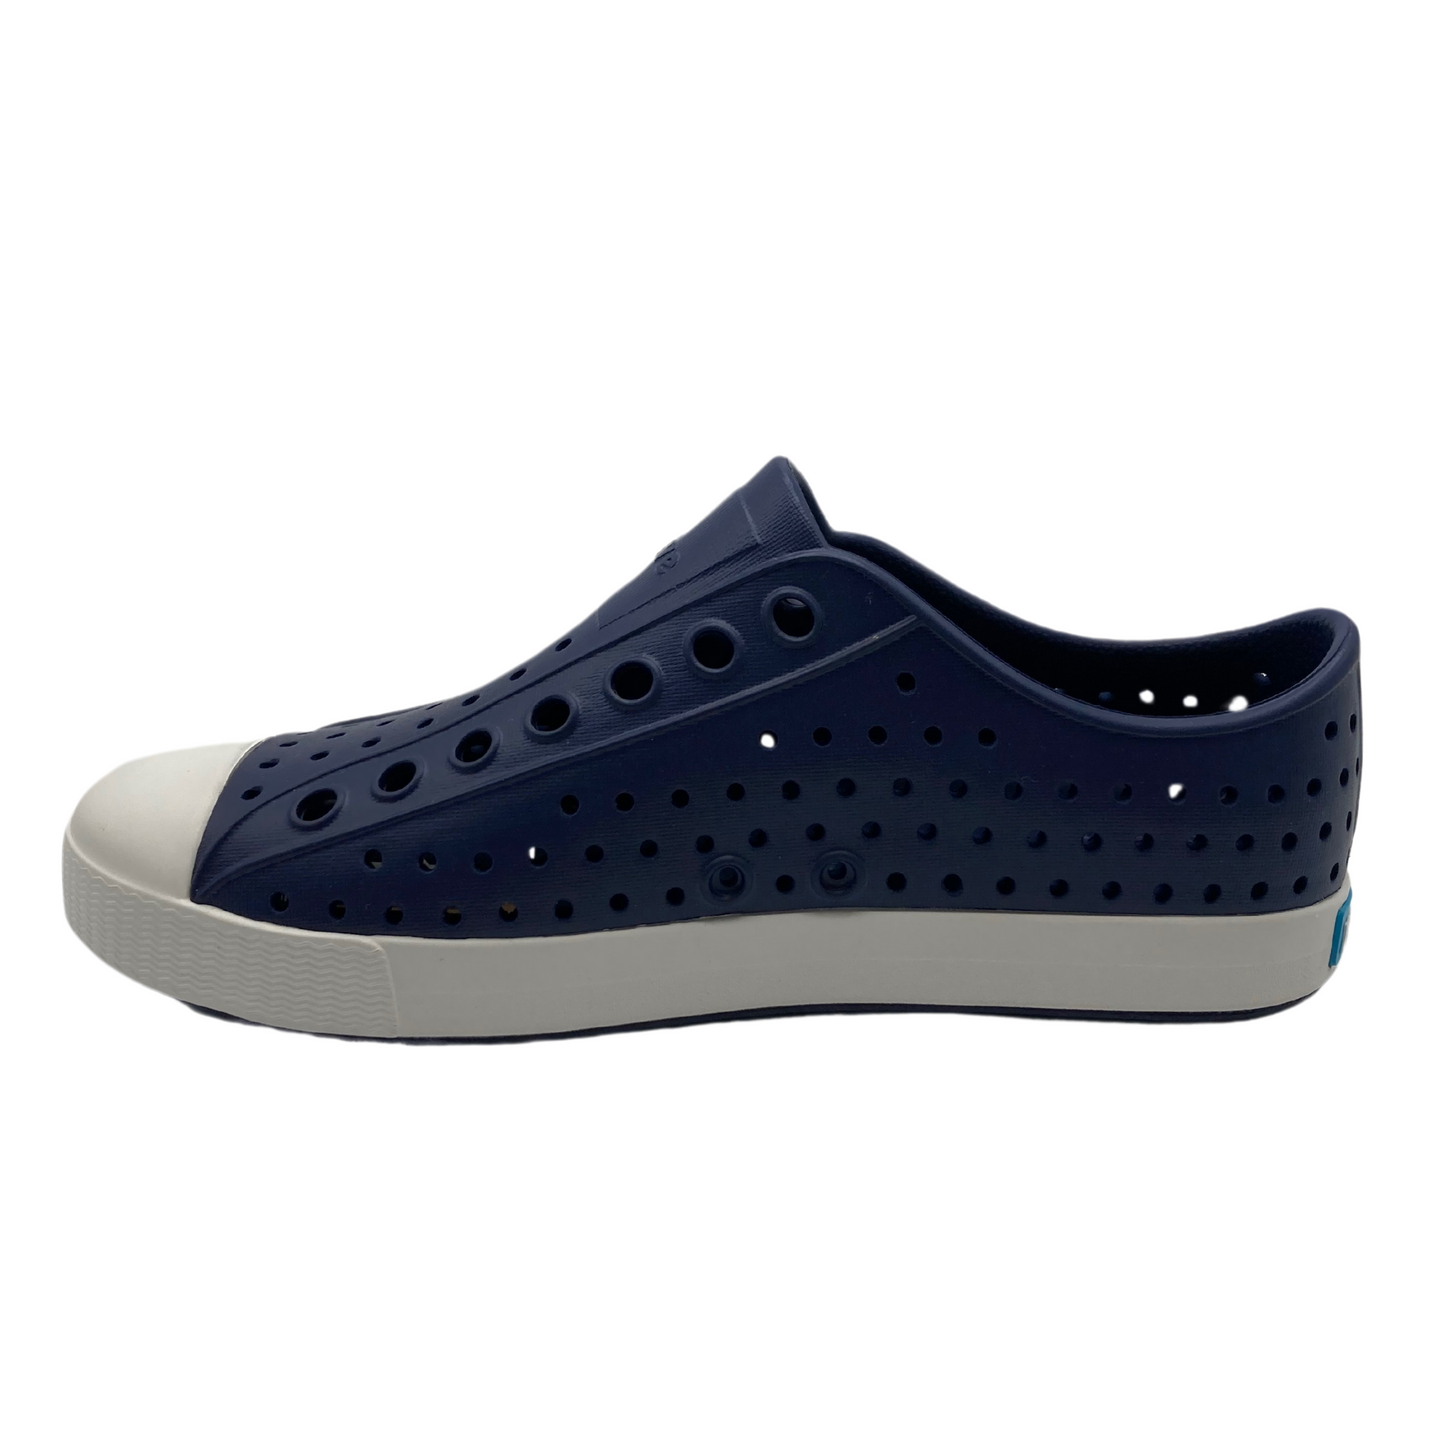 A dark navy sneaker is pictured in profile, showing rows of perforations and a white toe box and sole.